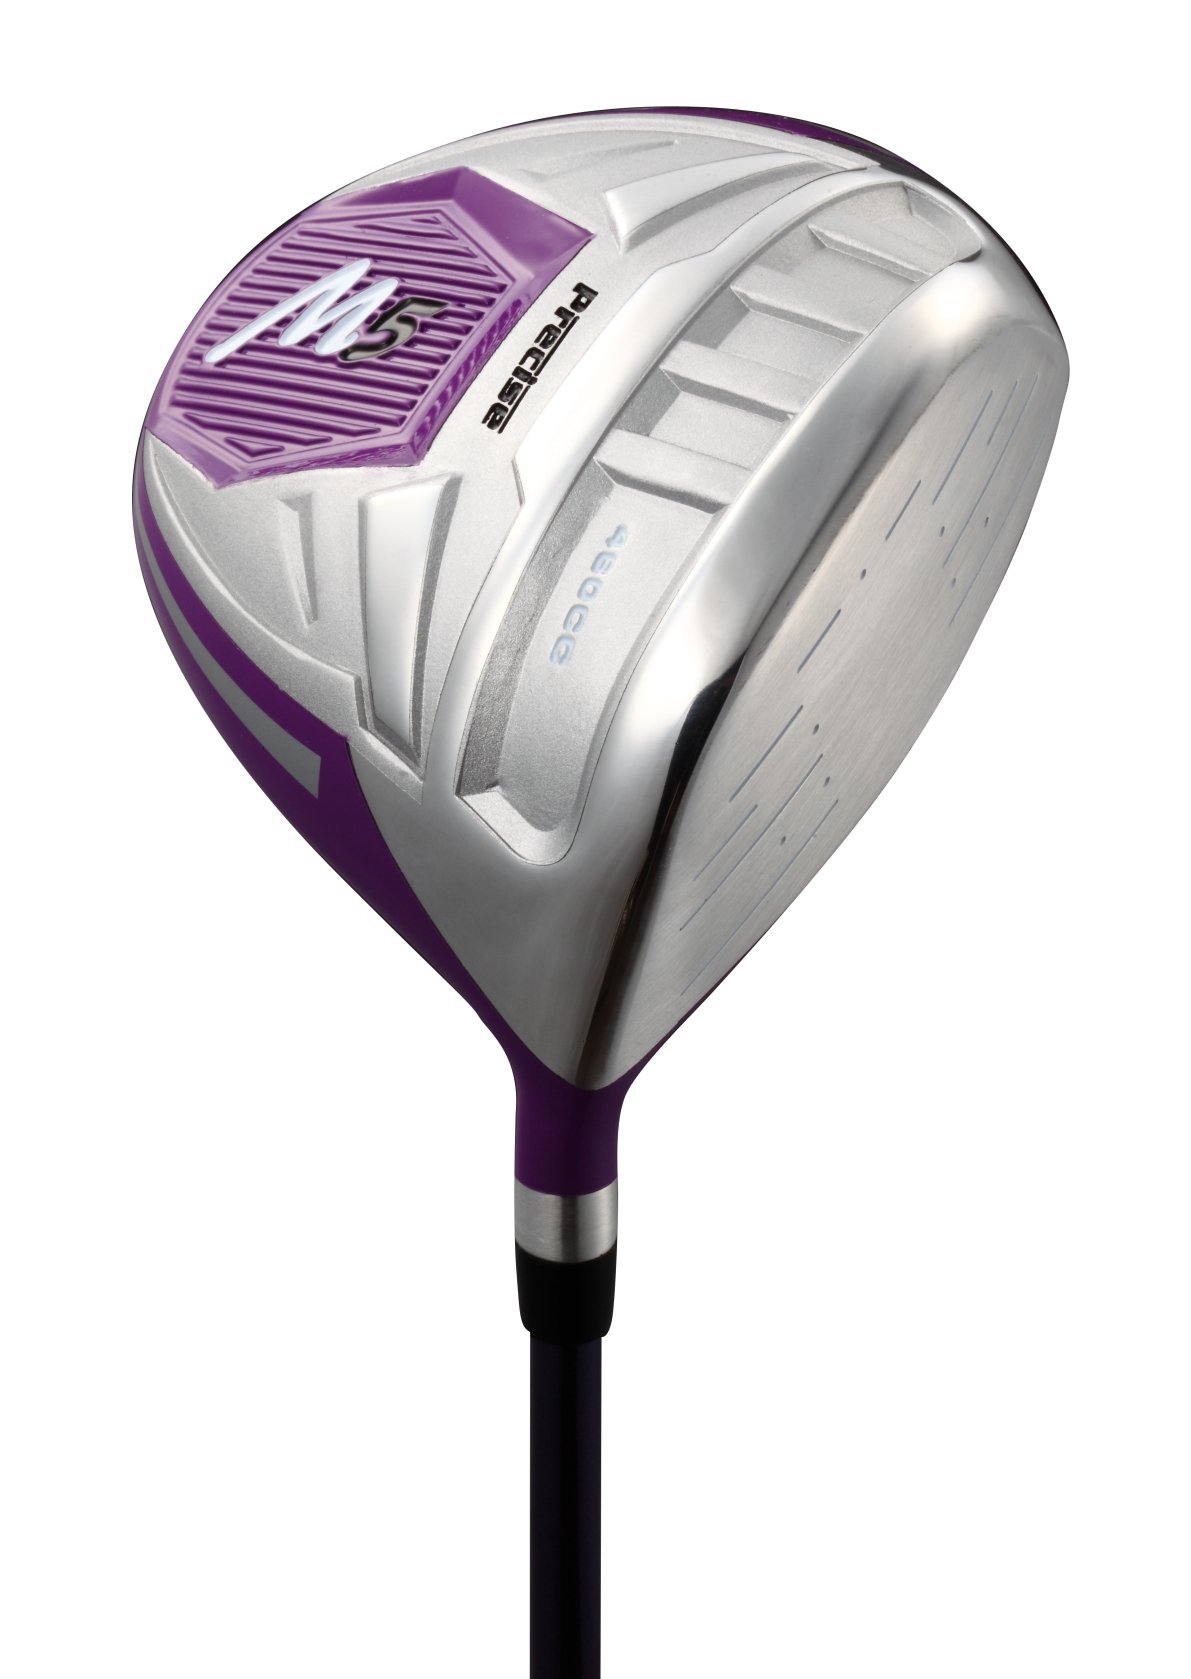 Precise Top Line Ladies Purple Right Handed M5 Golf Club Set, 460cc Driver, 3 Wood, 21* Hybrid, 5, 6, 7, 8, 9, PW Stainless Steel Irons, Putter, Graphite Shafts for Woods & Irons +Stand Bag + 3 Covers